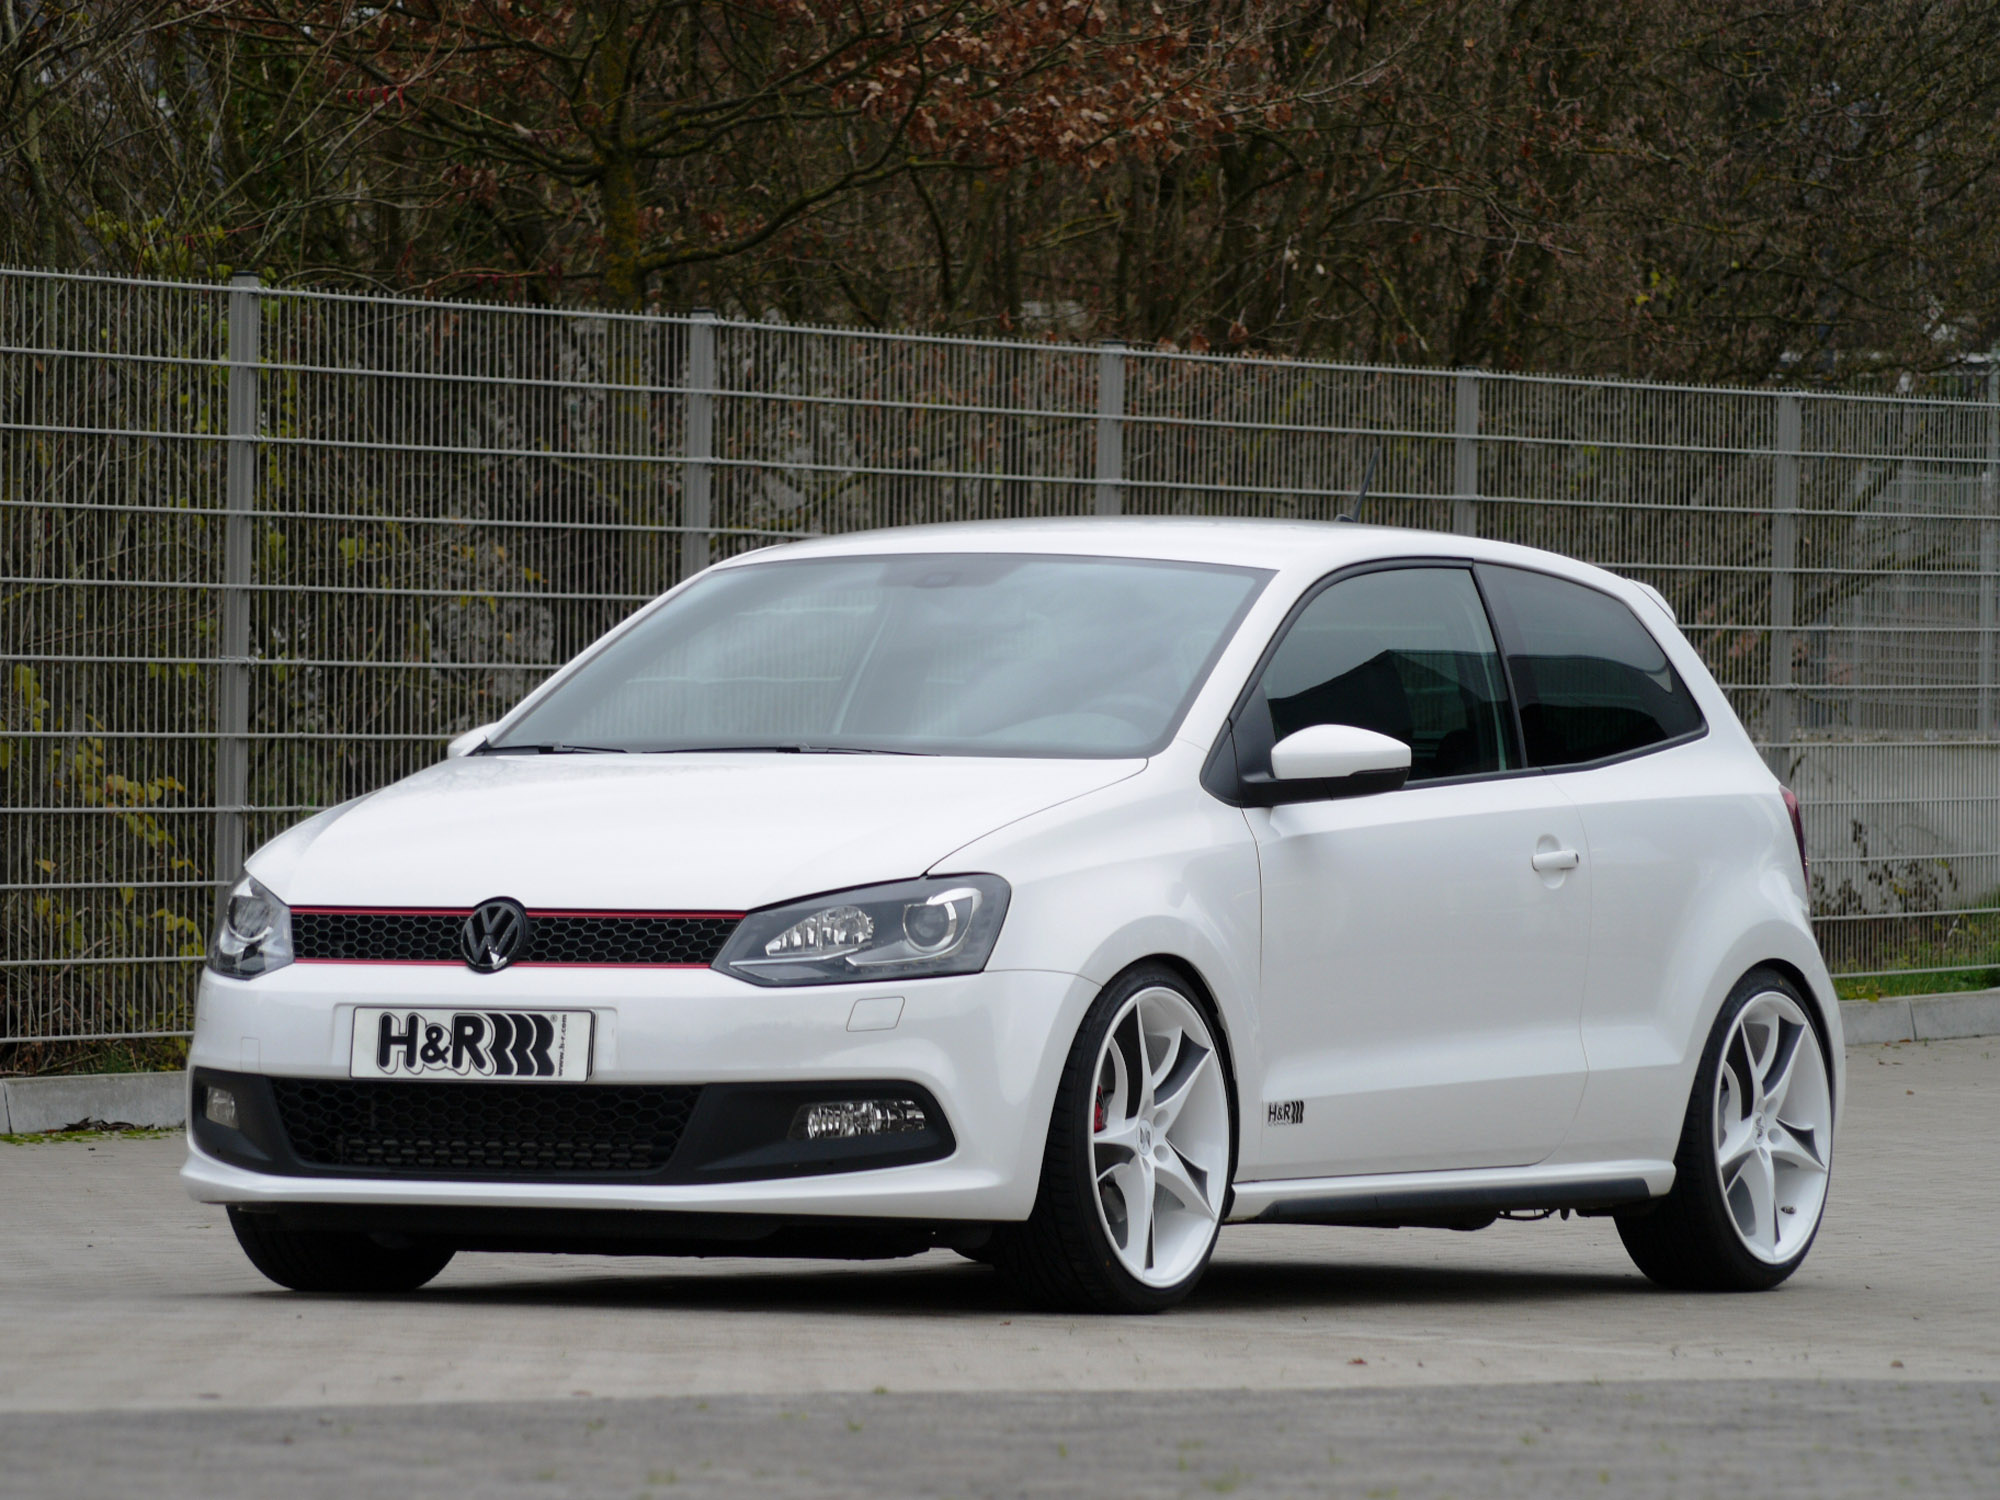 The Volkswagen Polo GTI is the latest car to be customized by the renowned